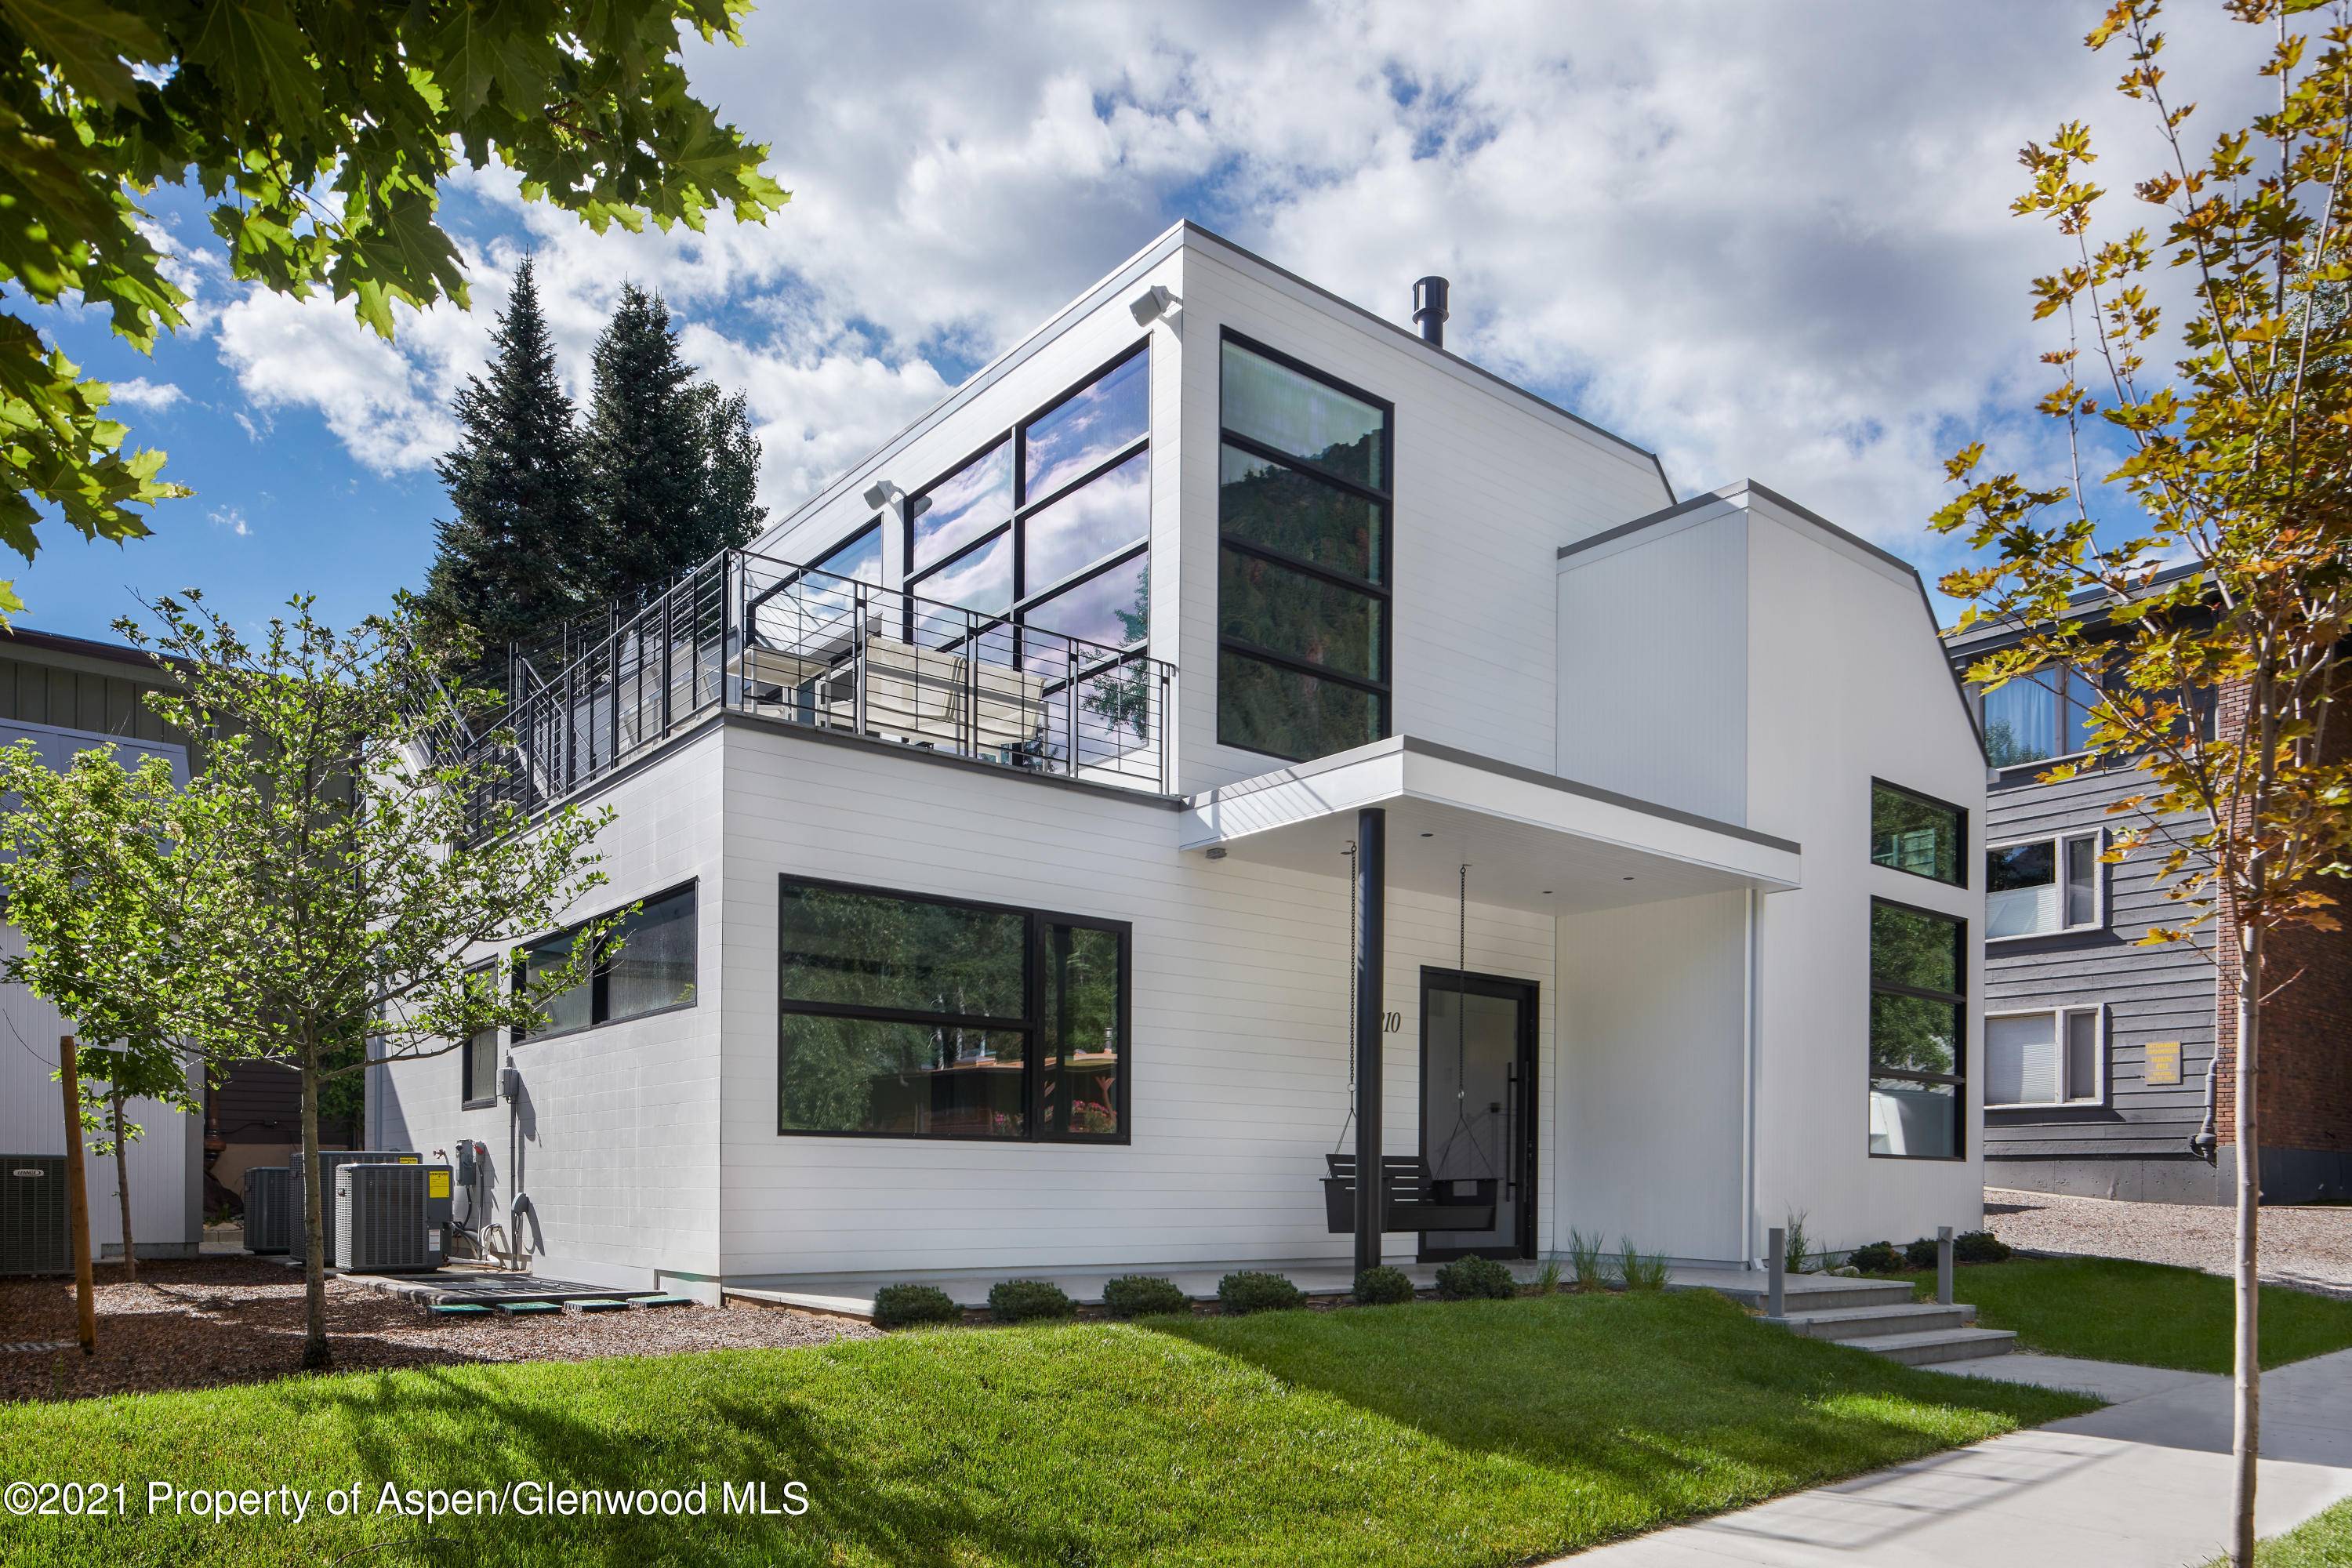 This brand new, modern home was designed by architect Gretchen Greenwood and built by Garvik Construction.